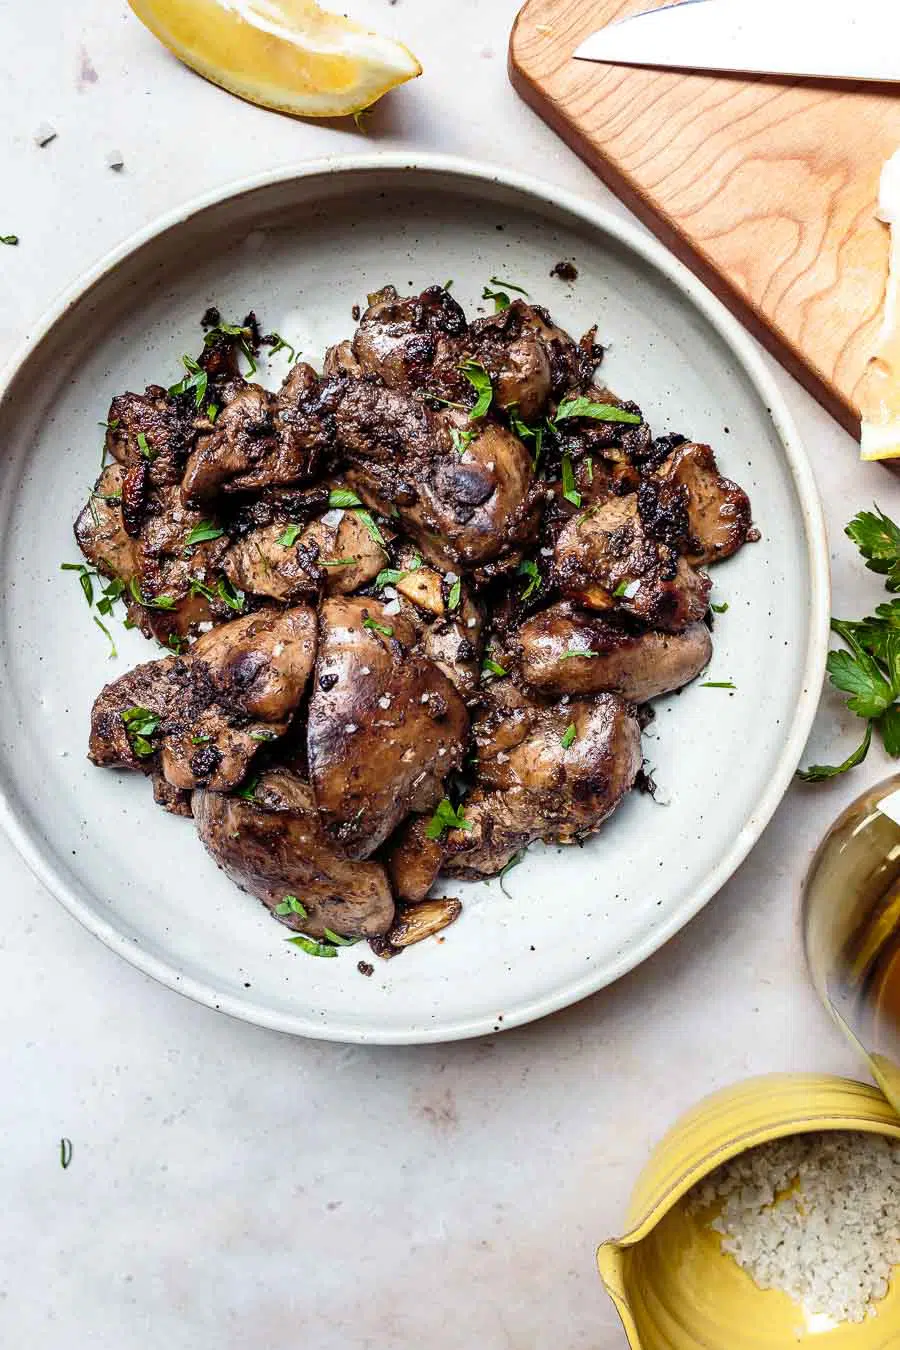 sautéed lemon garlic chicken liver with fresh parsley and lemon wedges on a stoneware plate with a cutting board, knife, and lemon in the background